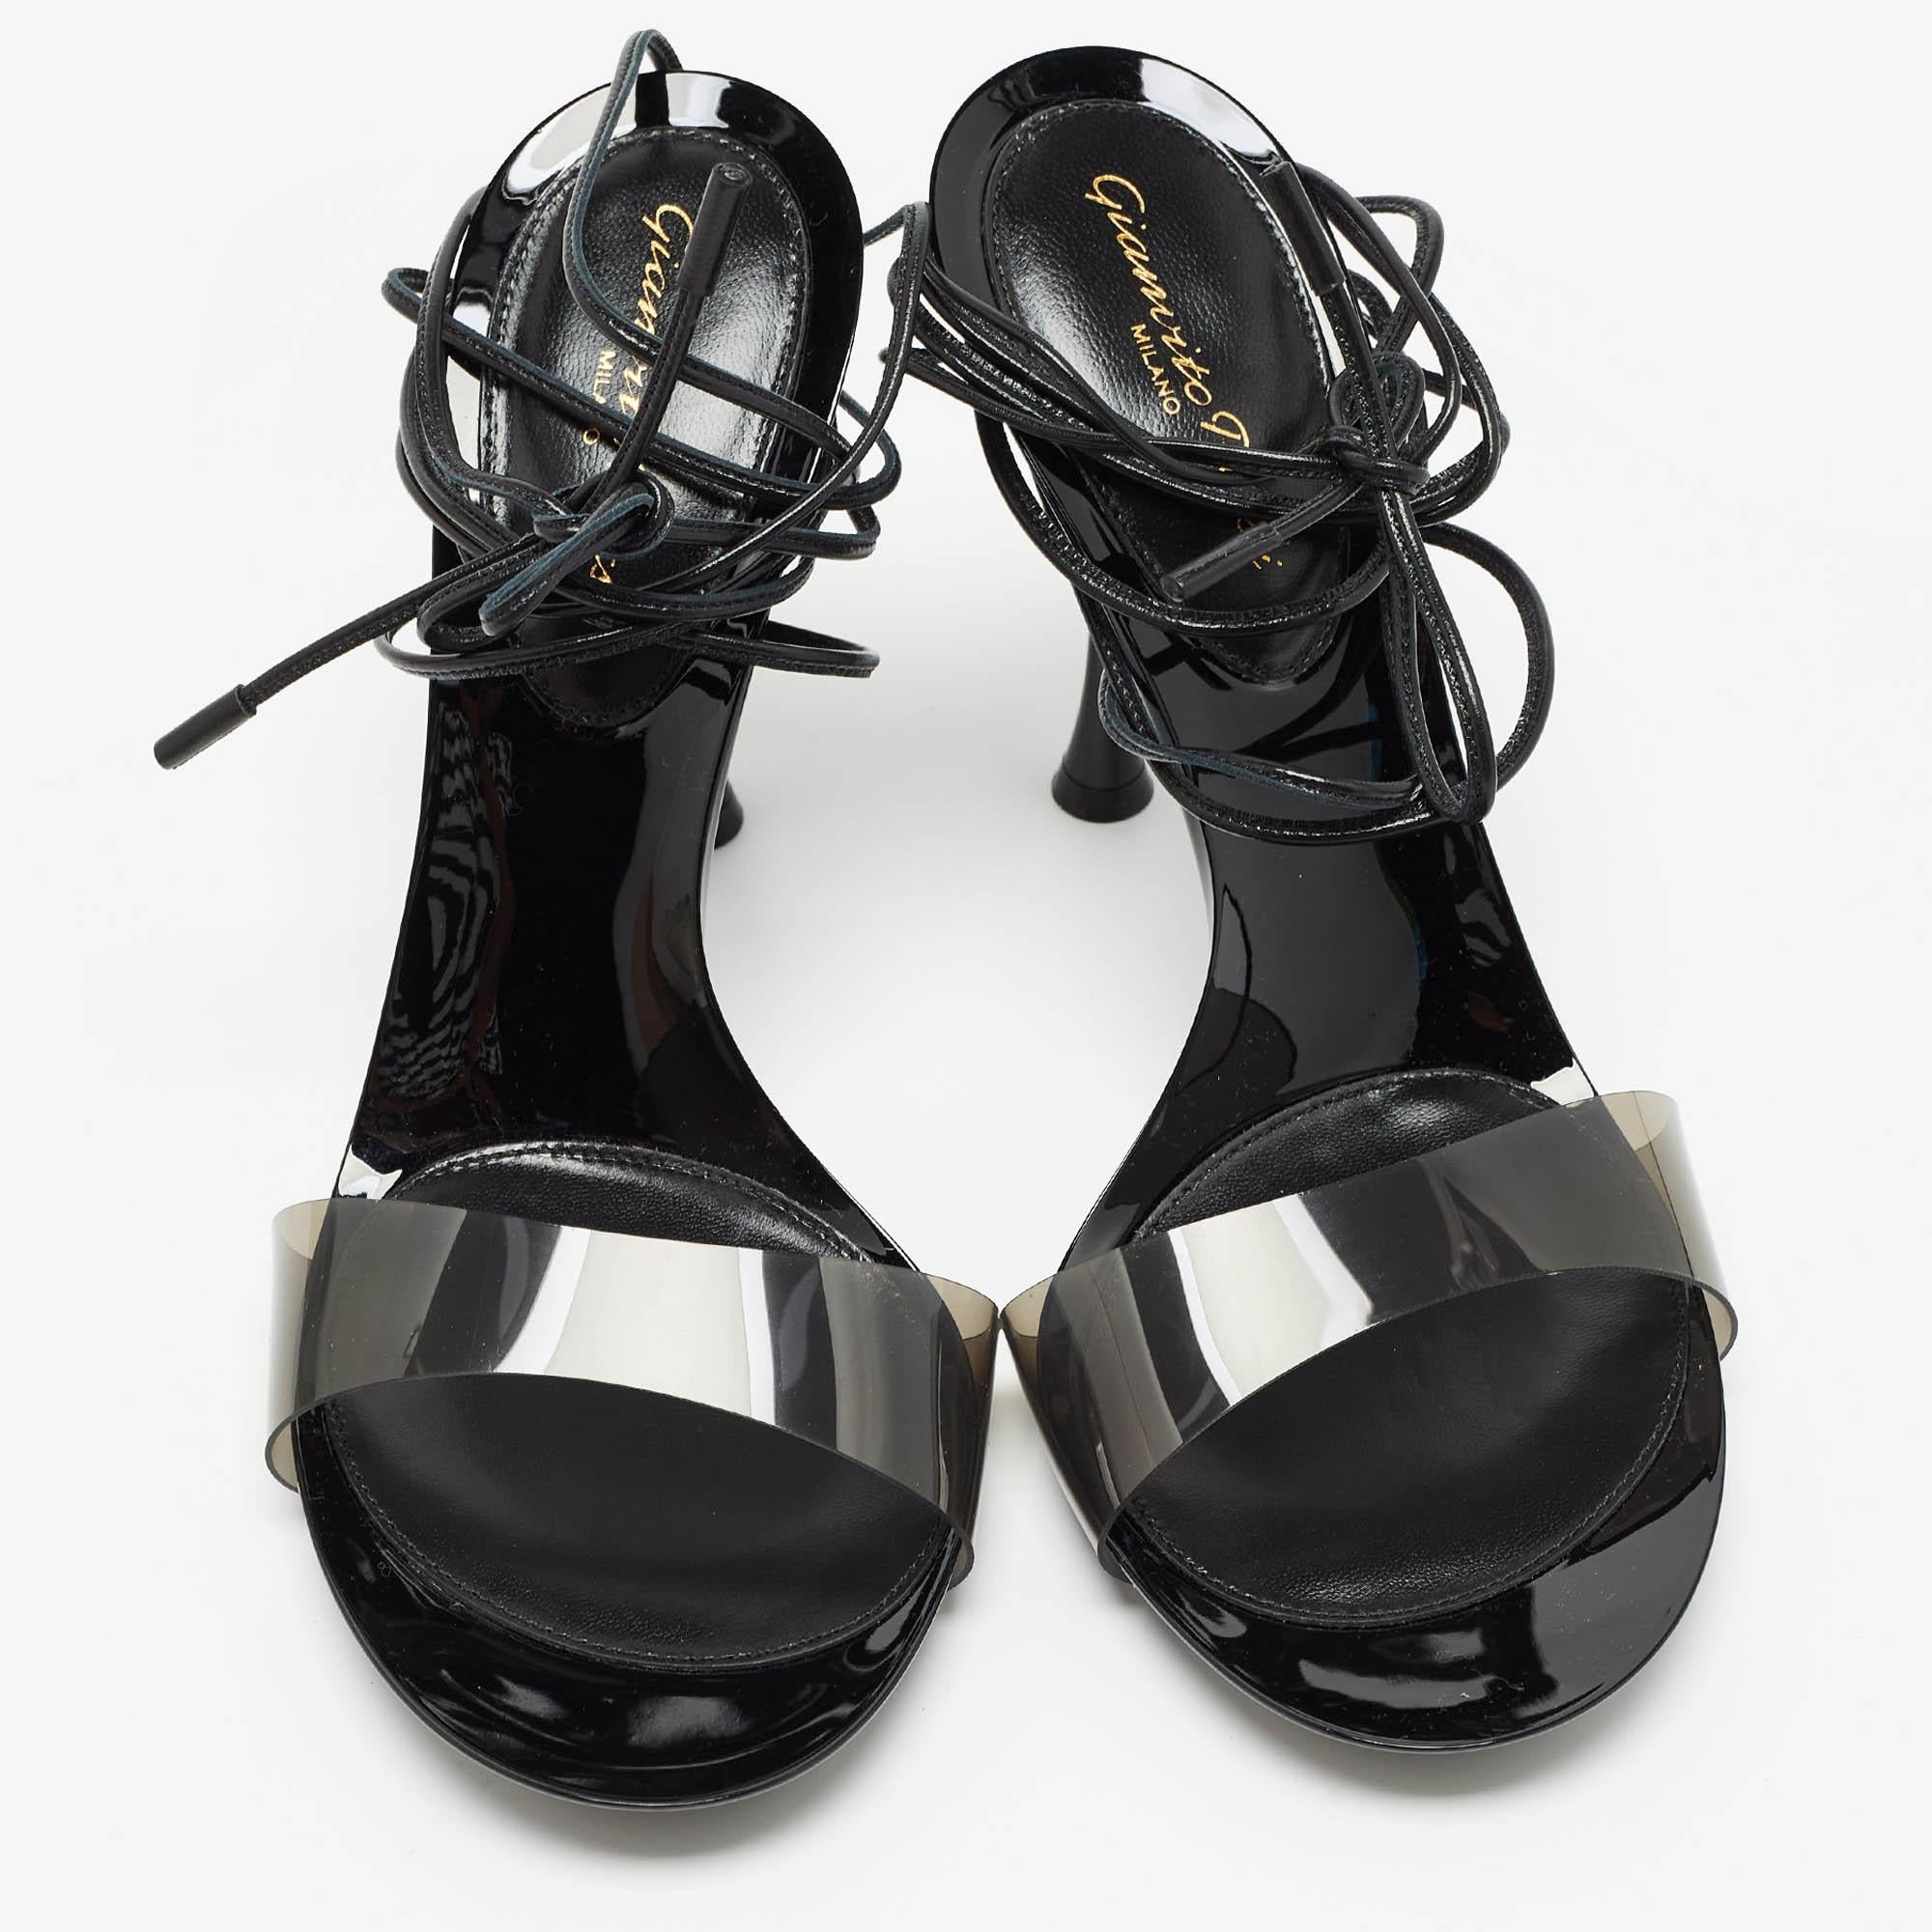 Crafted by Gianvito Rossi, these exquisite sandals seamlessly blend transparent PVC with supple leather, creating an alluring contrast. The delicate ankle ties add a touch of femininity, while the sleek design exudes modernity. Perfect for